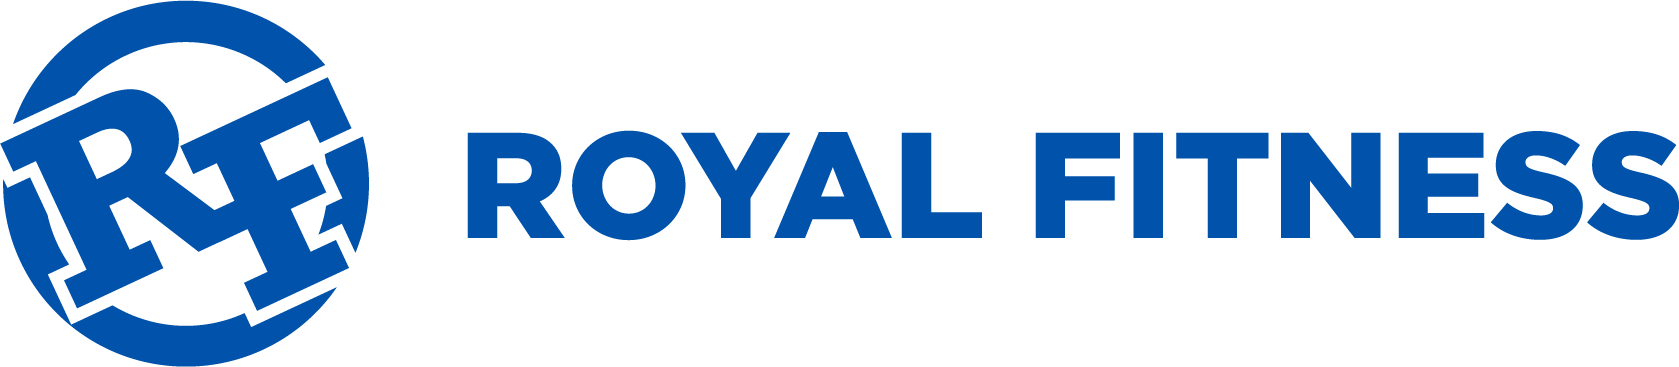 The logo for royal fitness is blue and white on a white background.